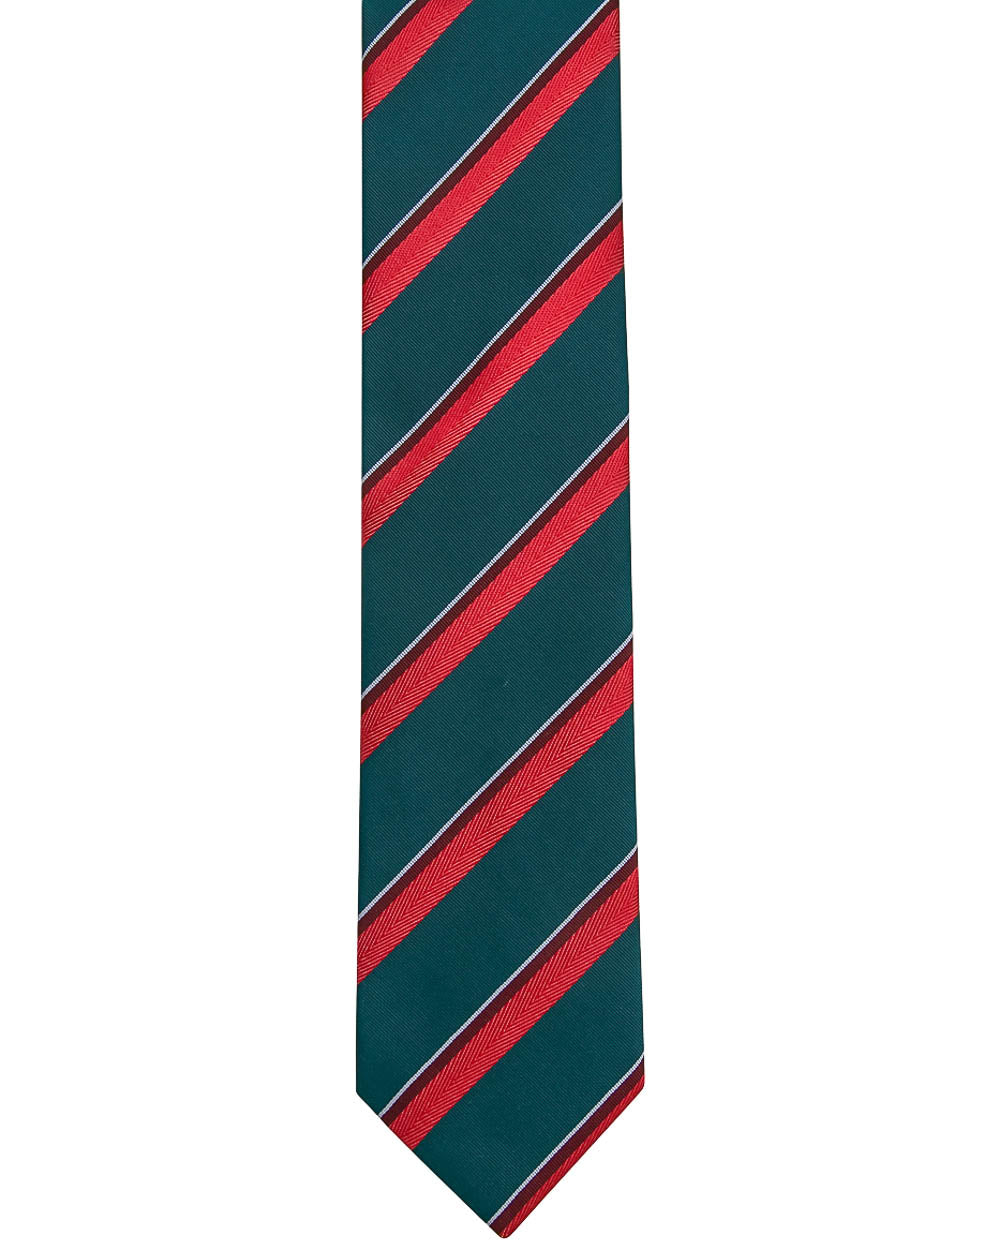 Teal Red and Light Blue Multi Stripe Tie